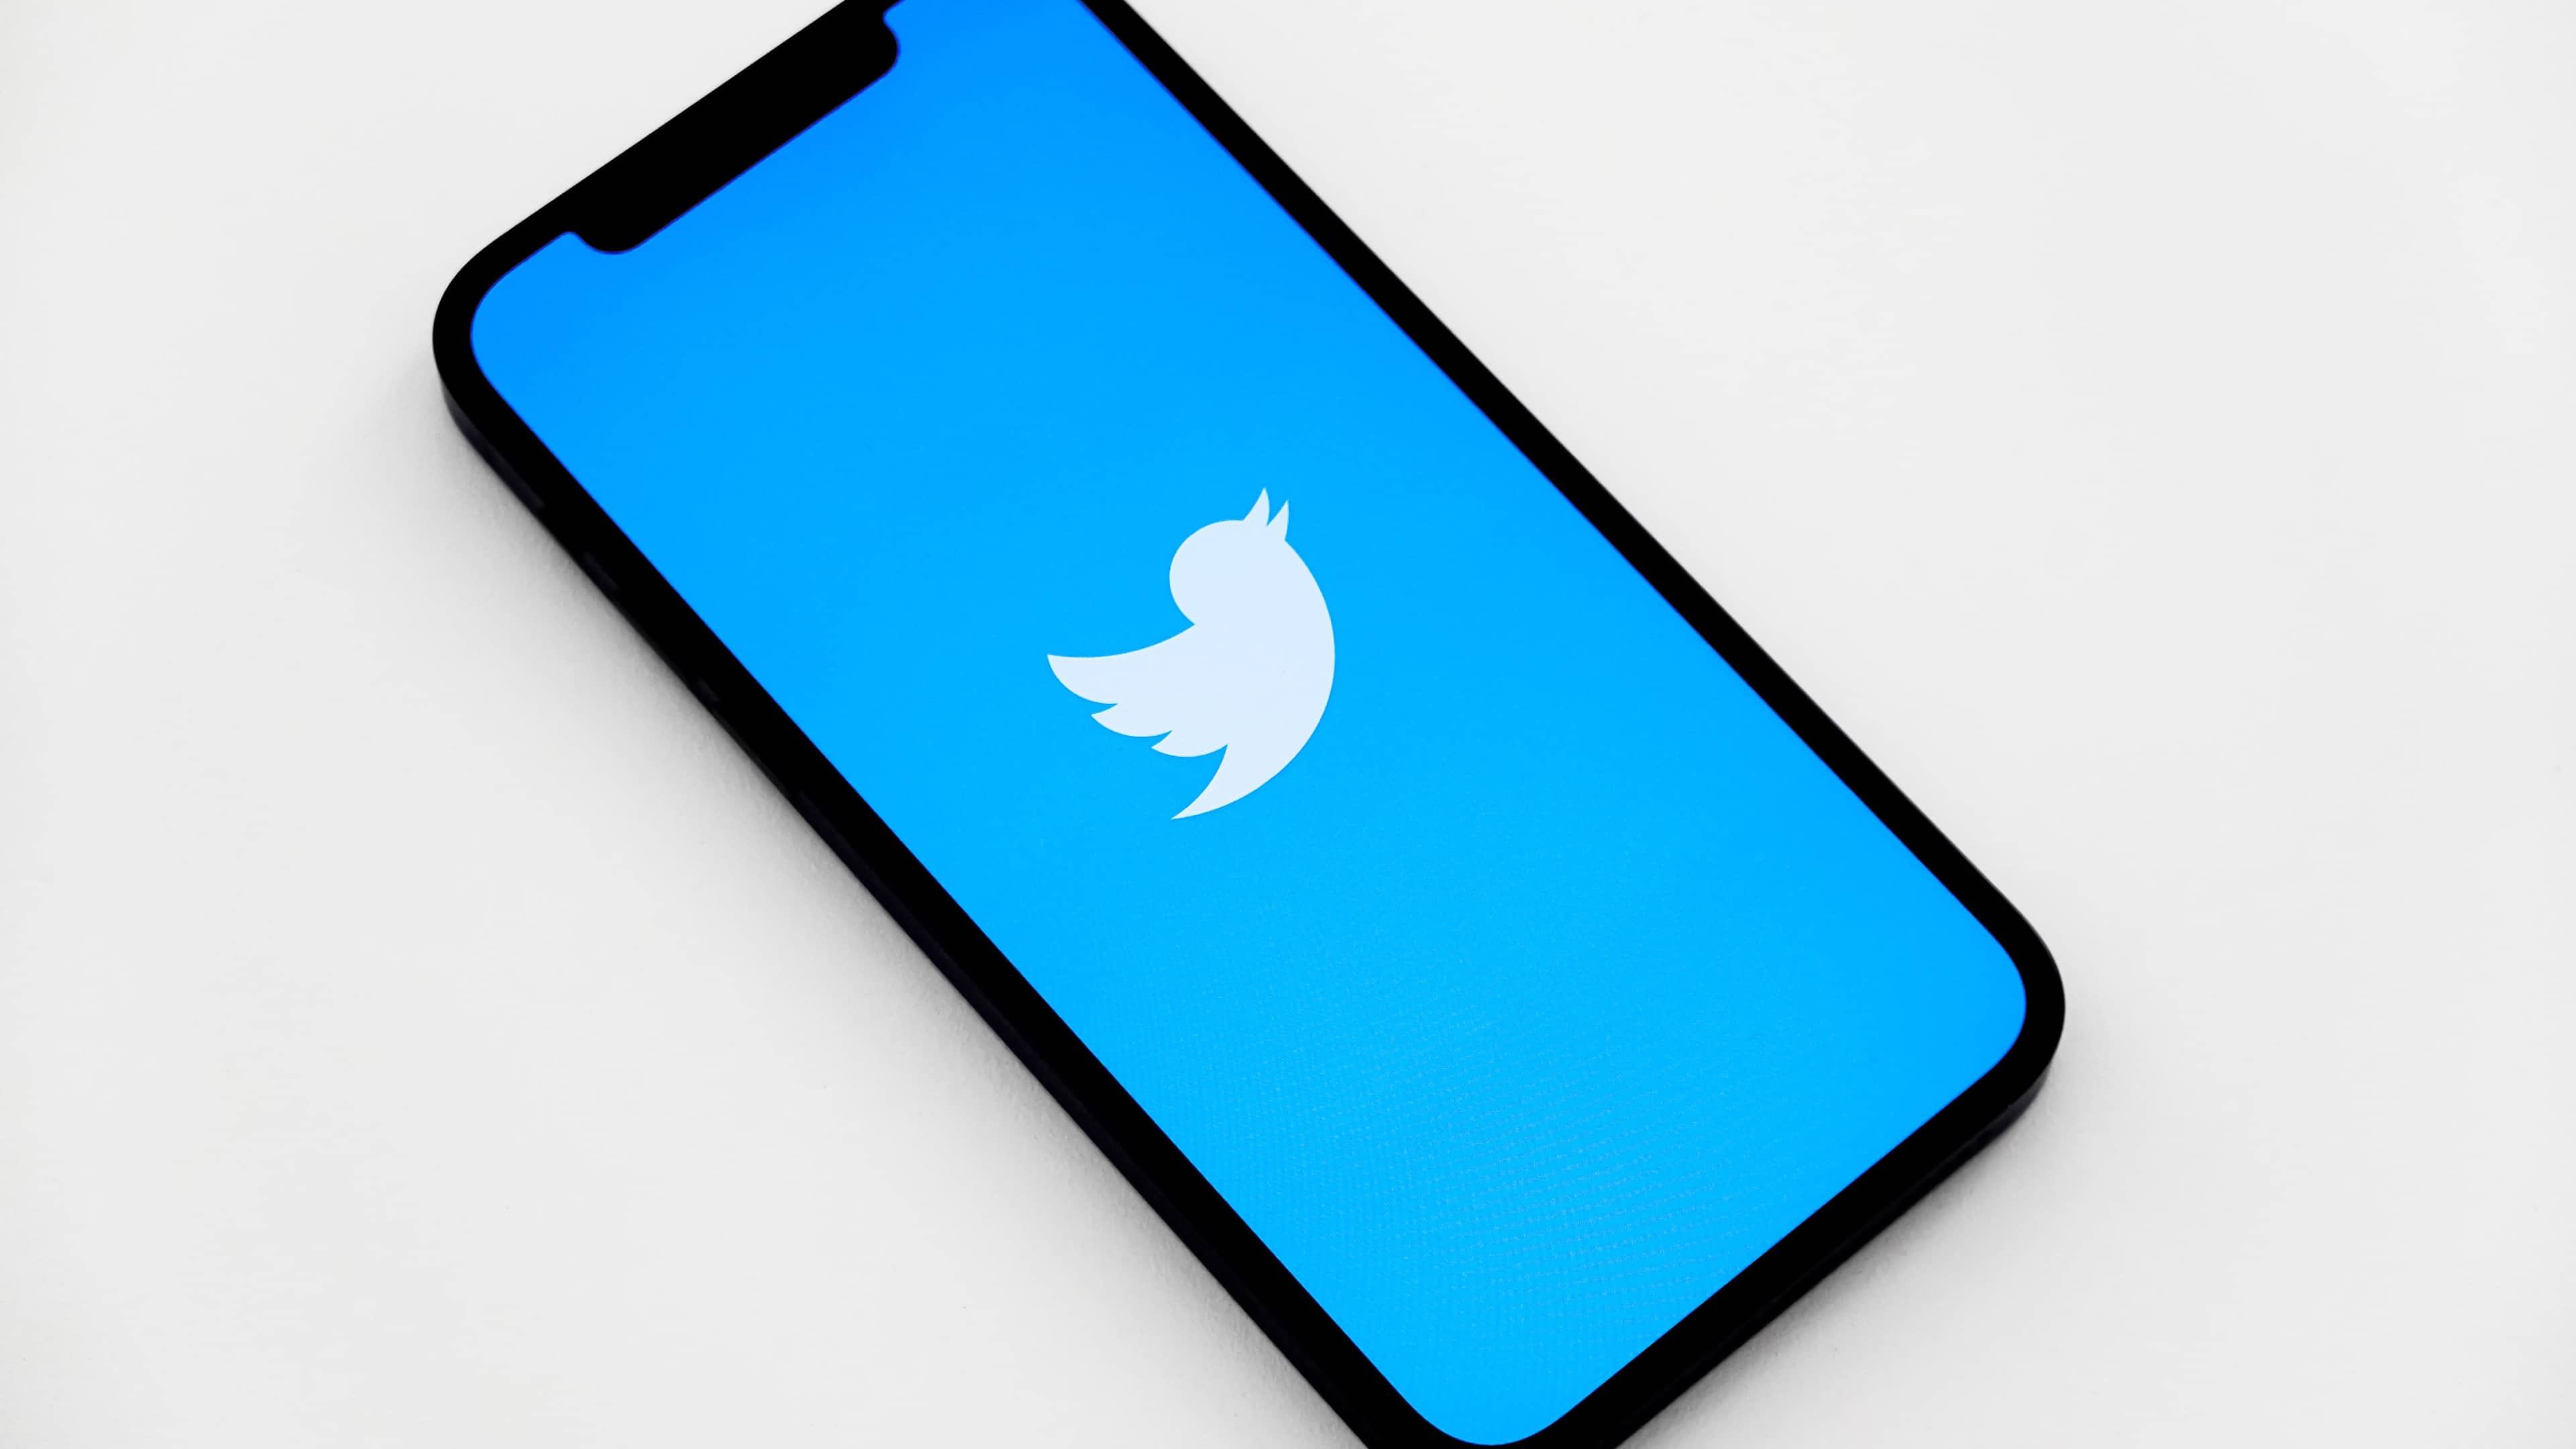 Twitter app updated with new Twitter Blue features that apparently aren’t live for everyone yet